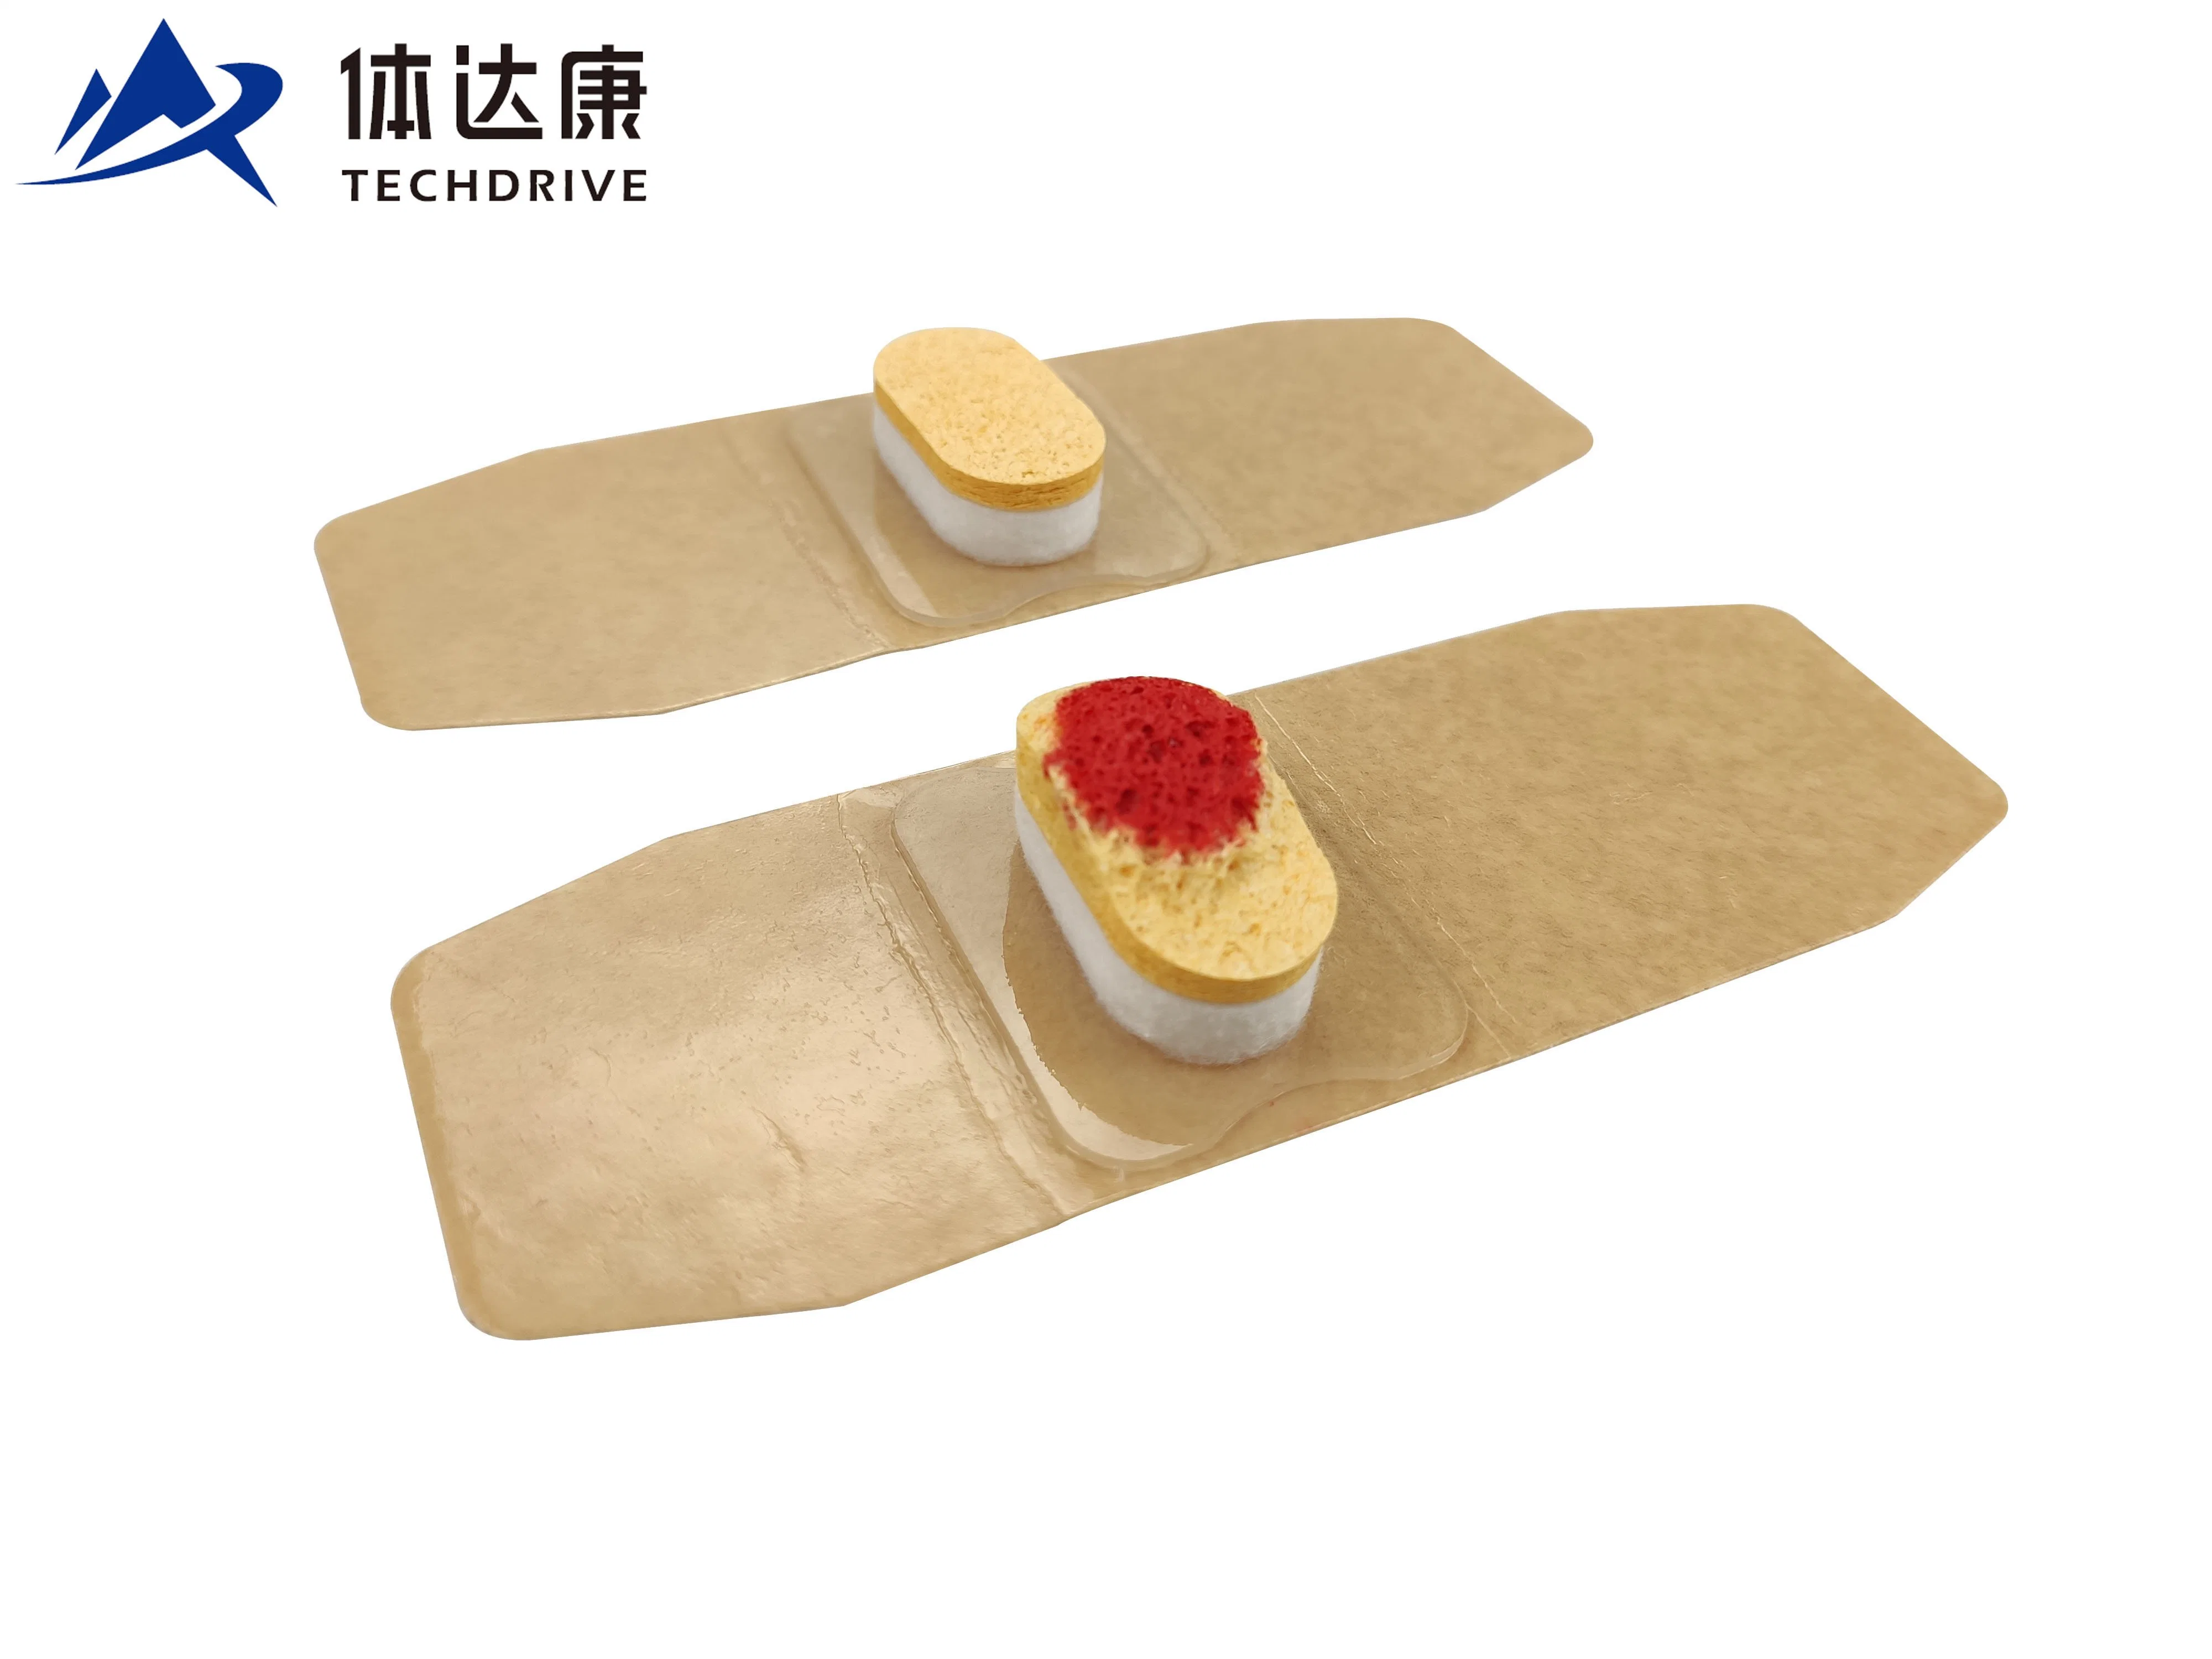 Adhesive Tape Medical Surgical Hemostatic Wound Dressing for Intravenous Injection